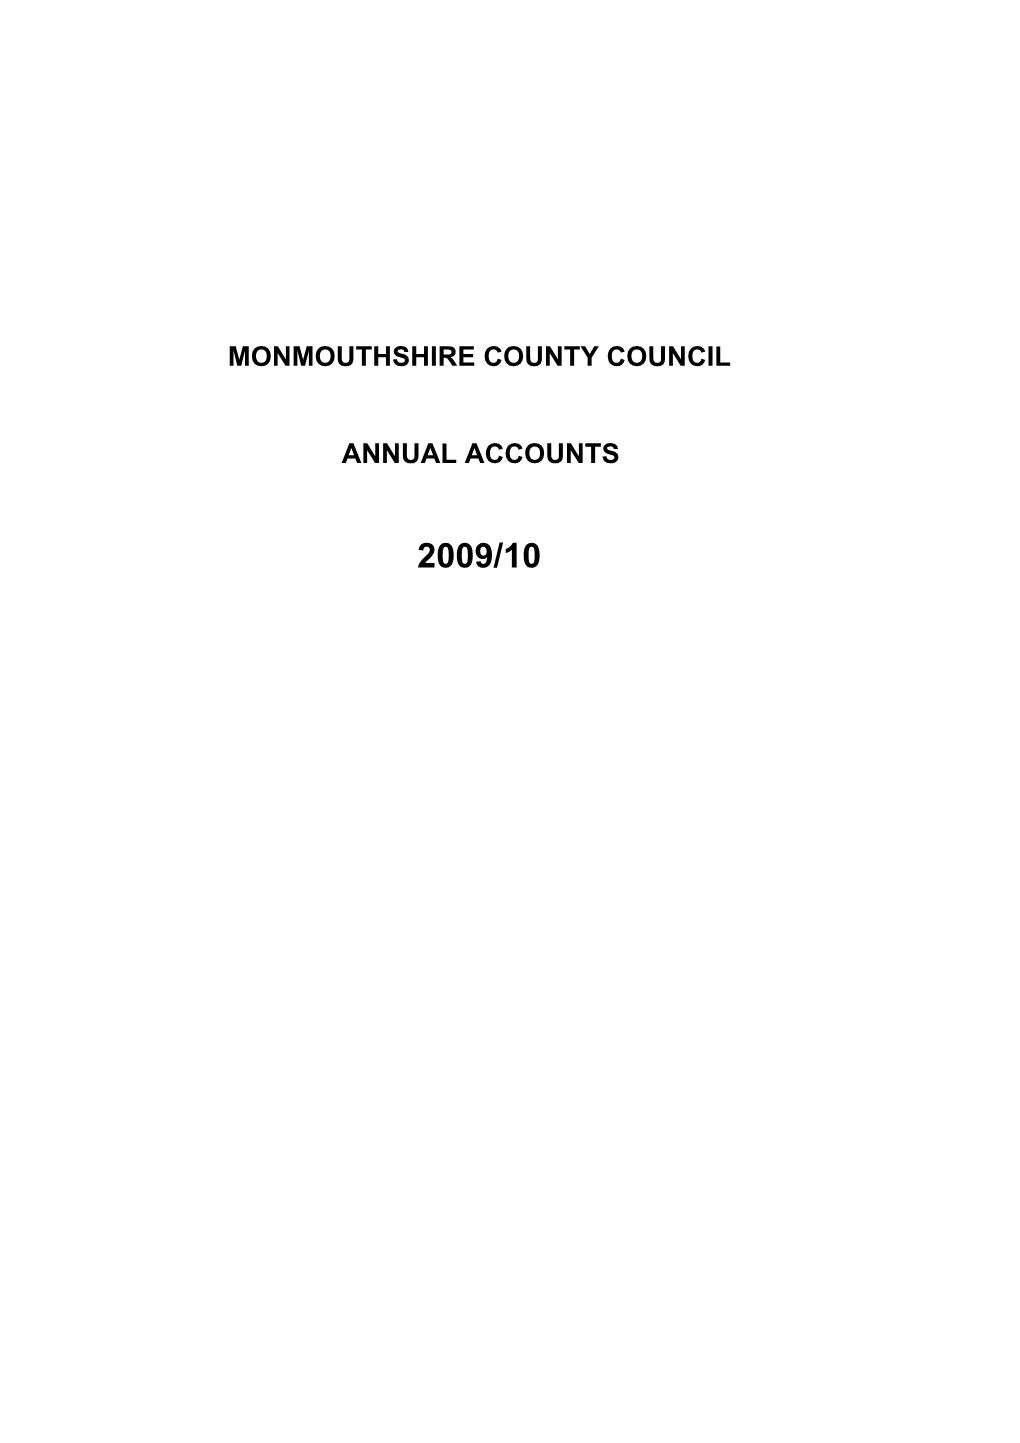 Monmouthshire County Council Annual Accounts 2009-10